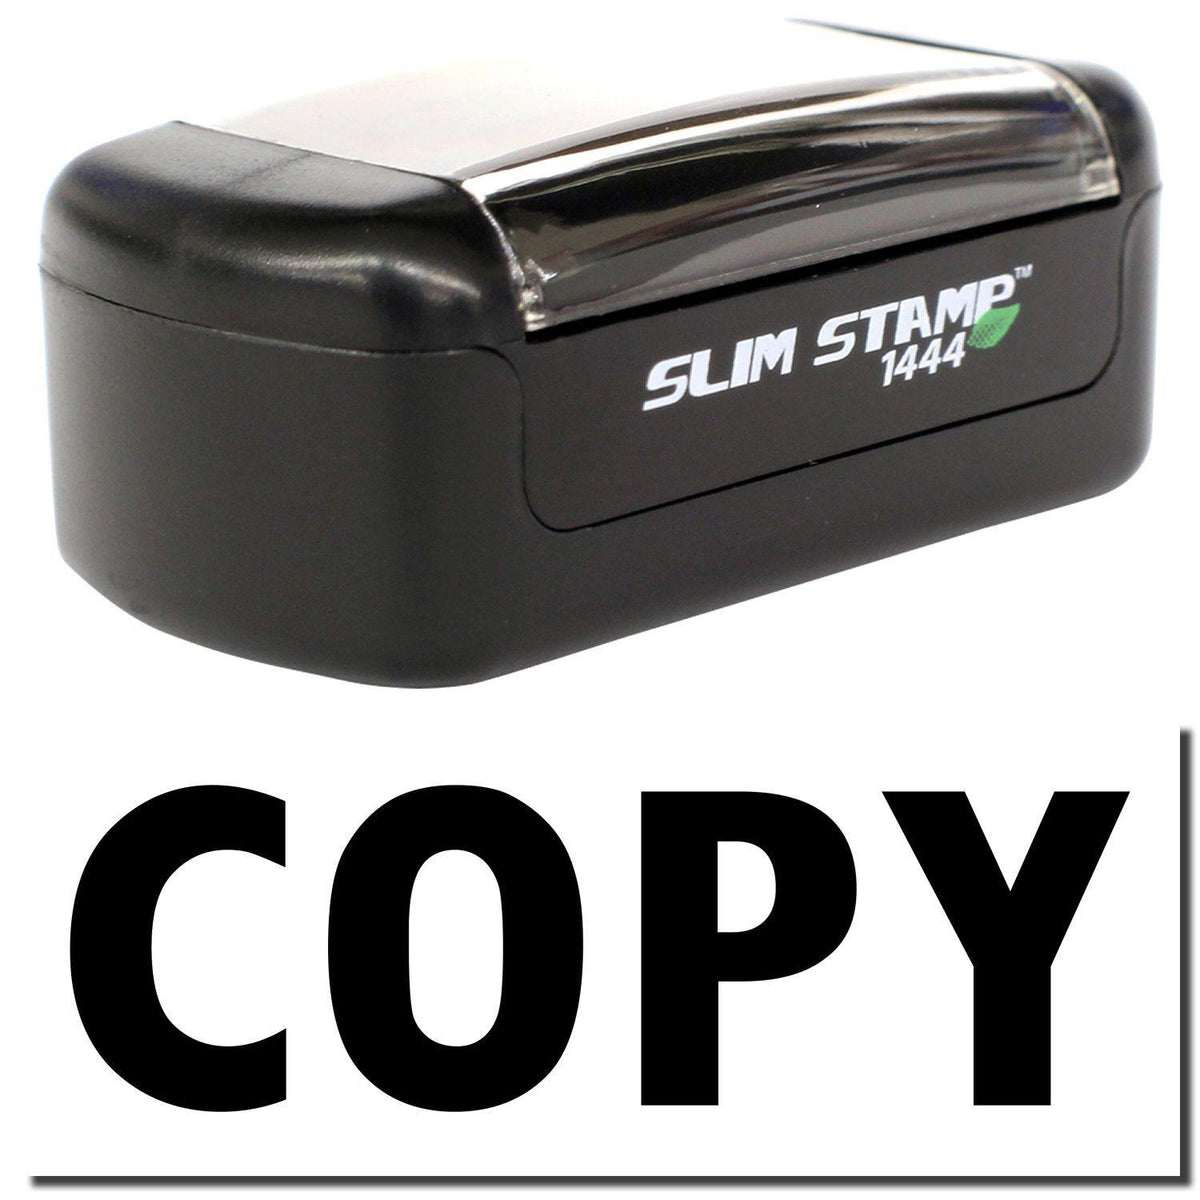 A stock office pre-inked stamp with a stamped image showing how the text &quot;COPY&quot; is displayed after stamping.